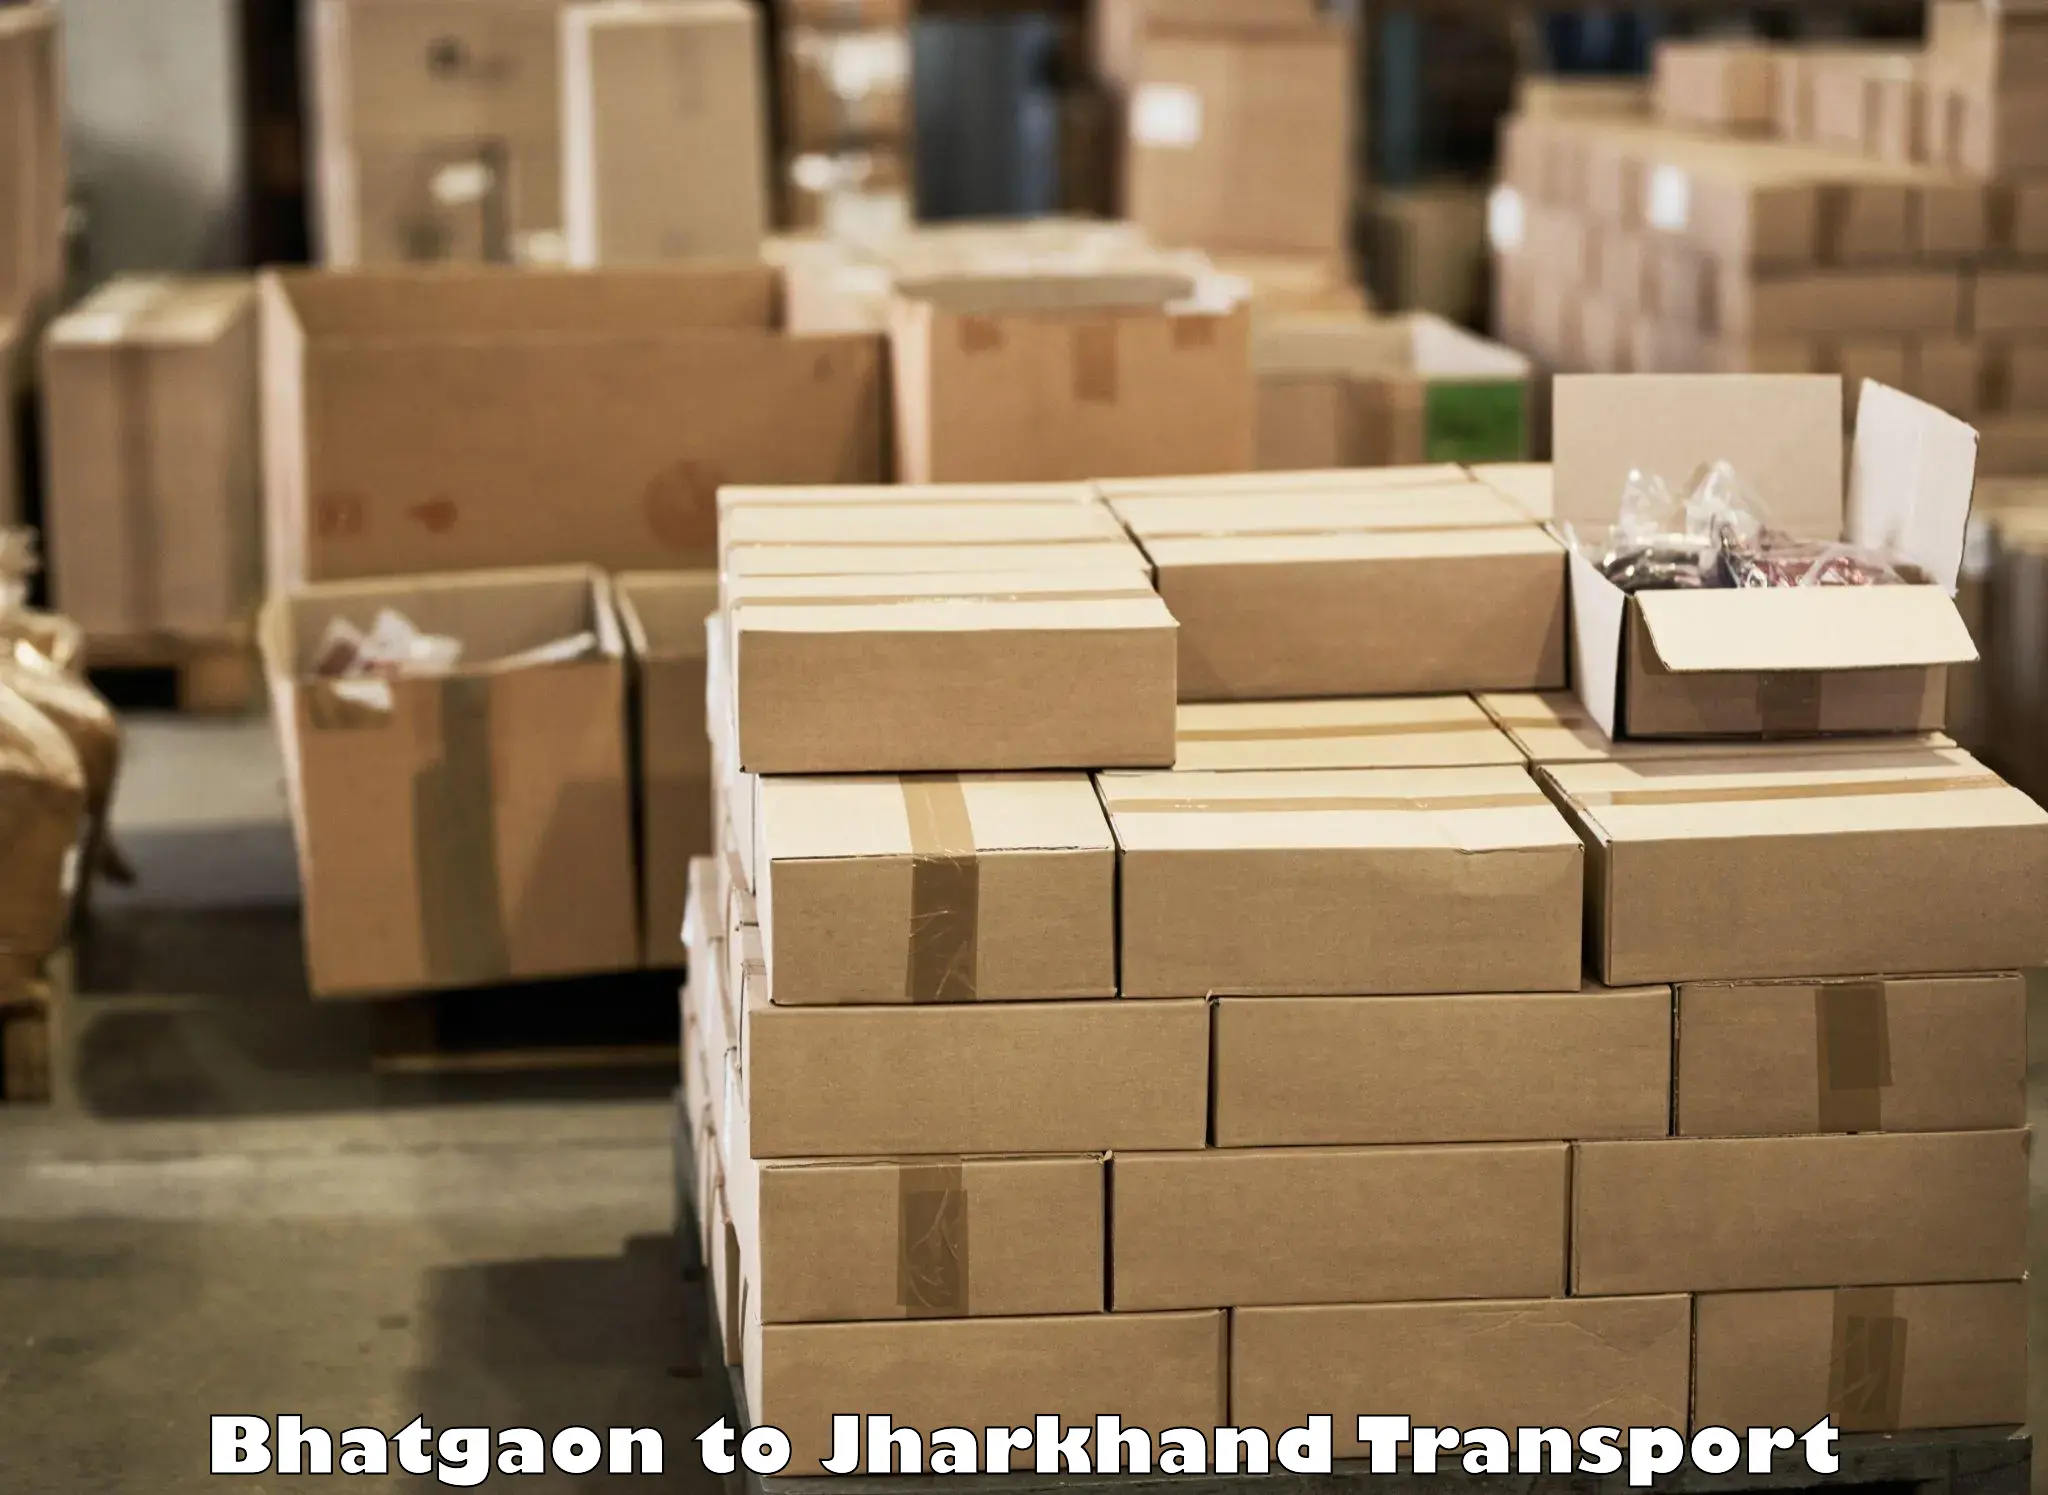 Two wheeler parcel service in Bhatgaon to Ranchi